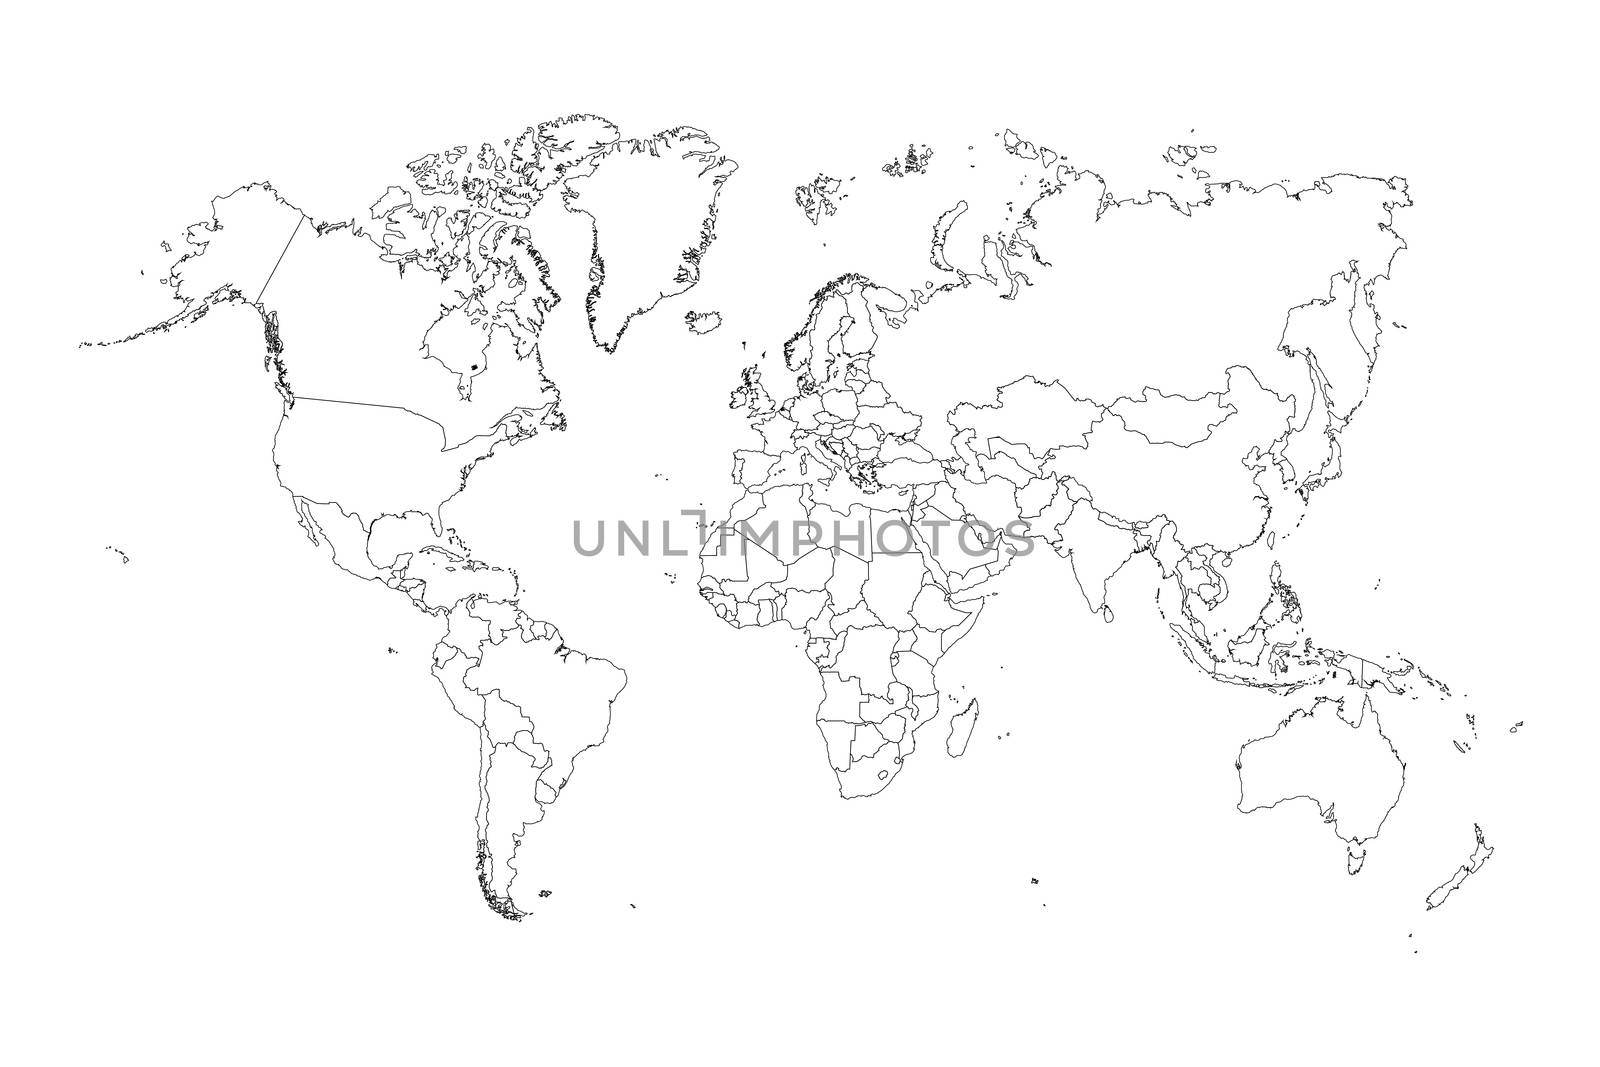 An Illustration of very fine outline of the world (with country borders)